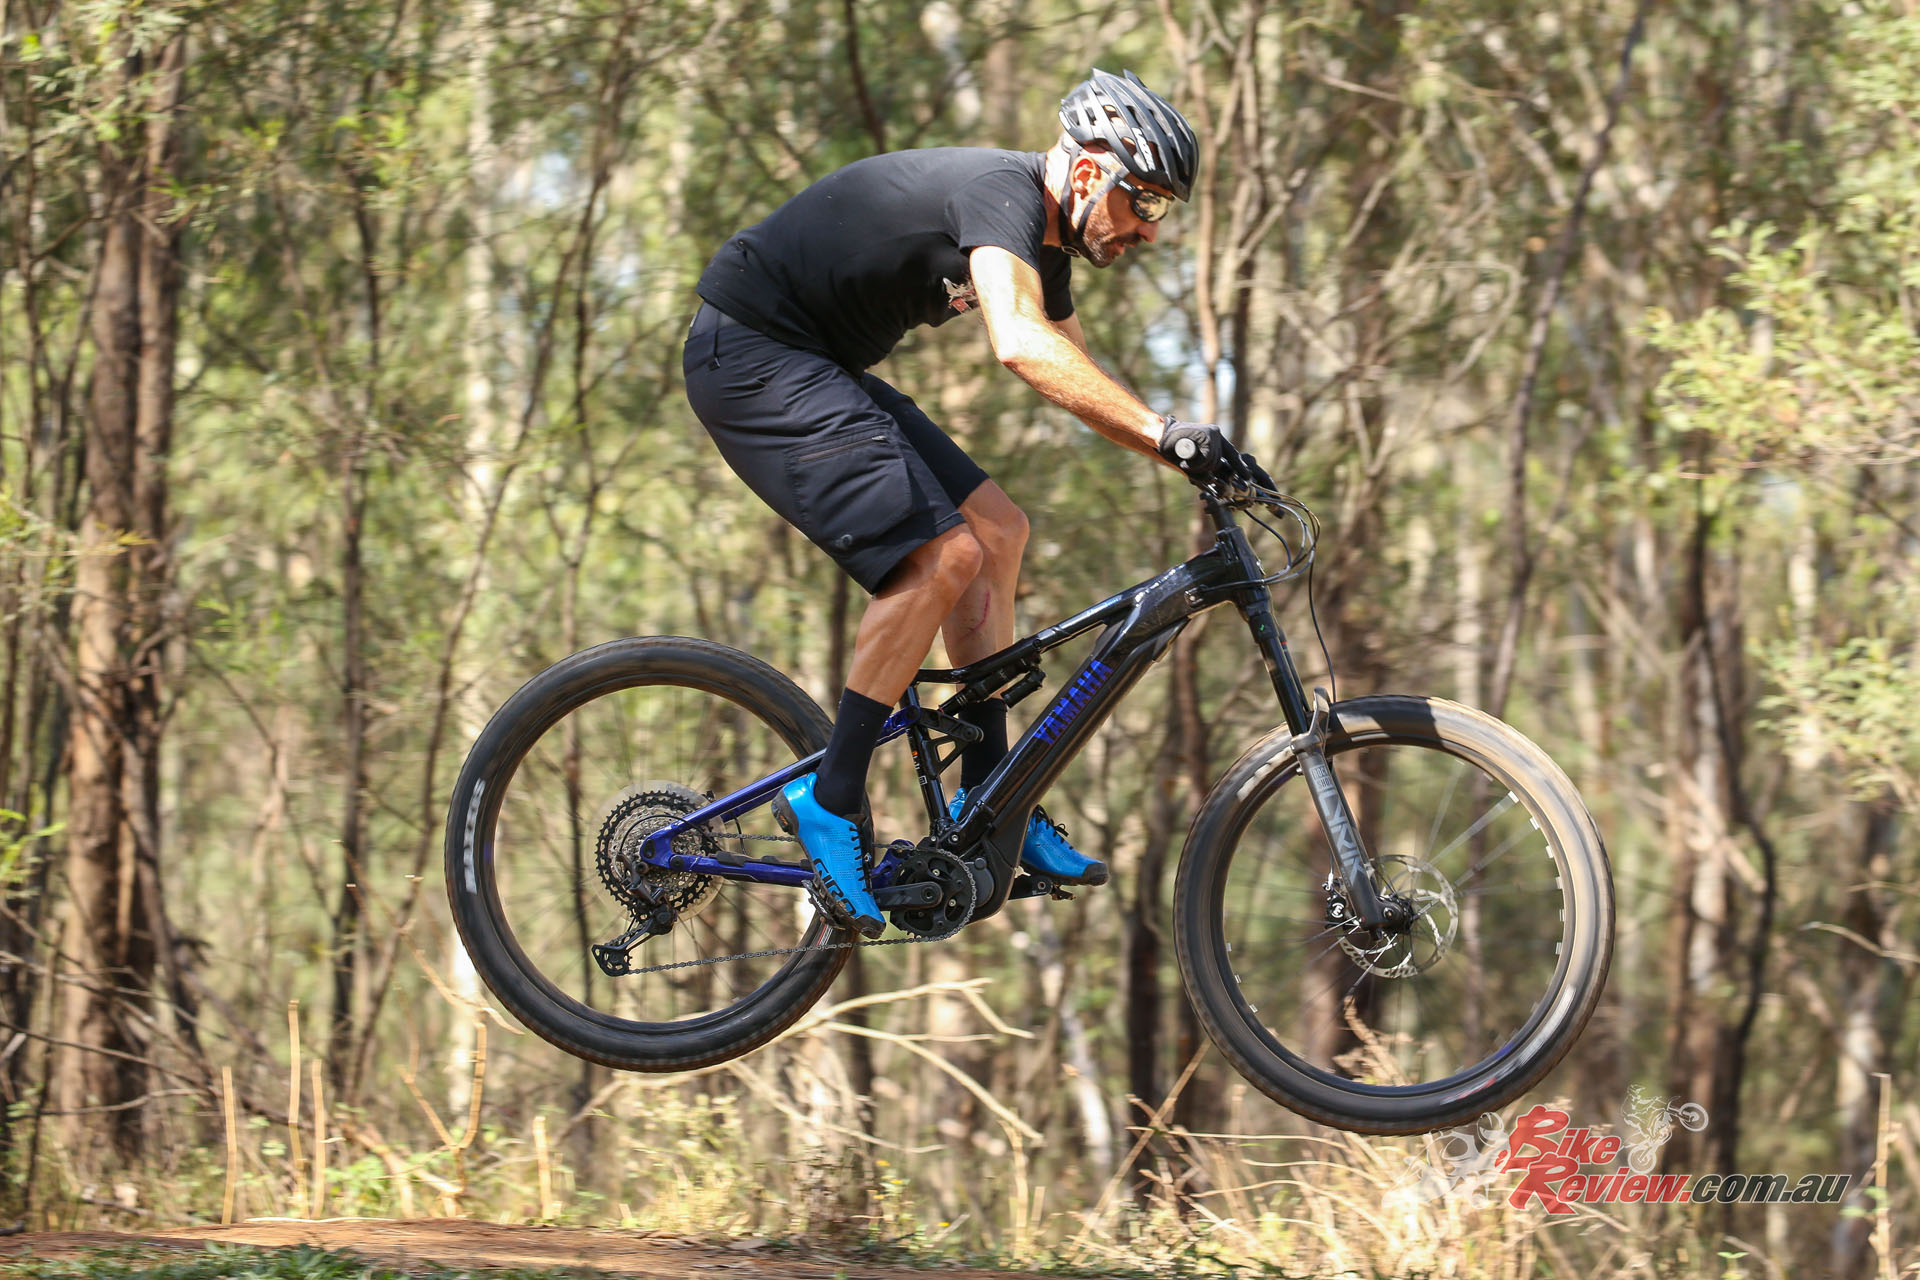 "Maybe it’s the extra weight of the e-bike compared to my analogue 29er, but the Moro 07 really feels stable in the air!"